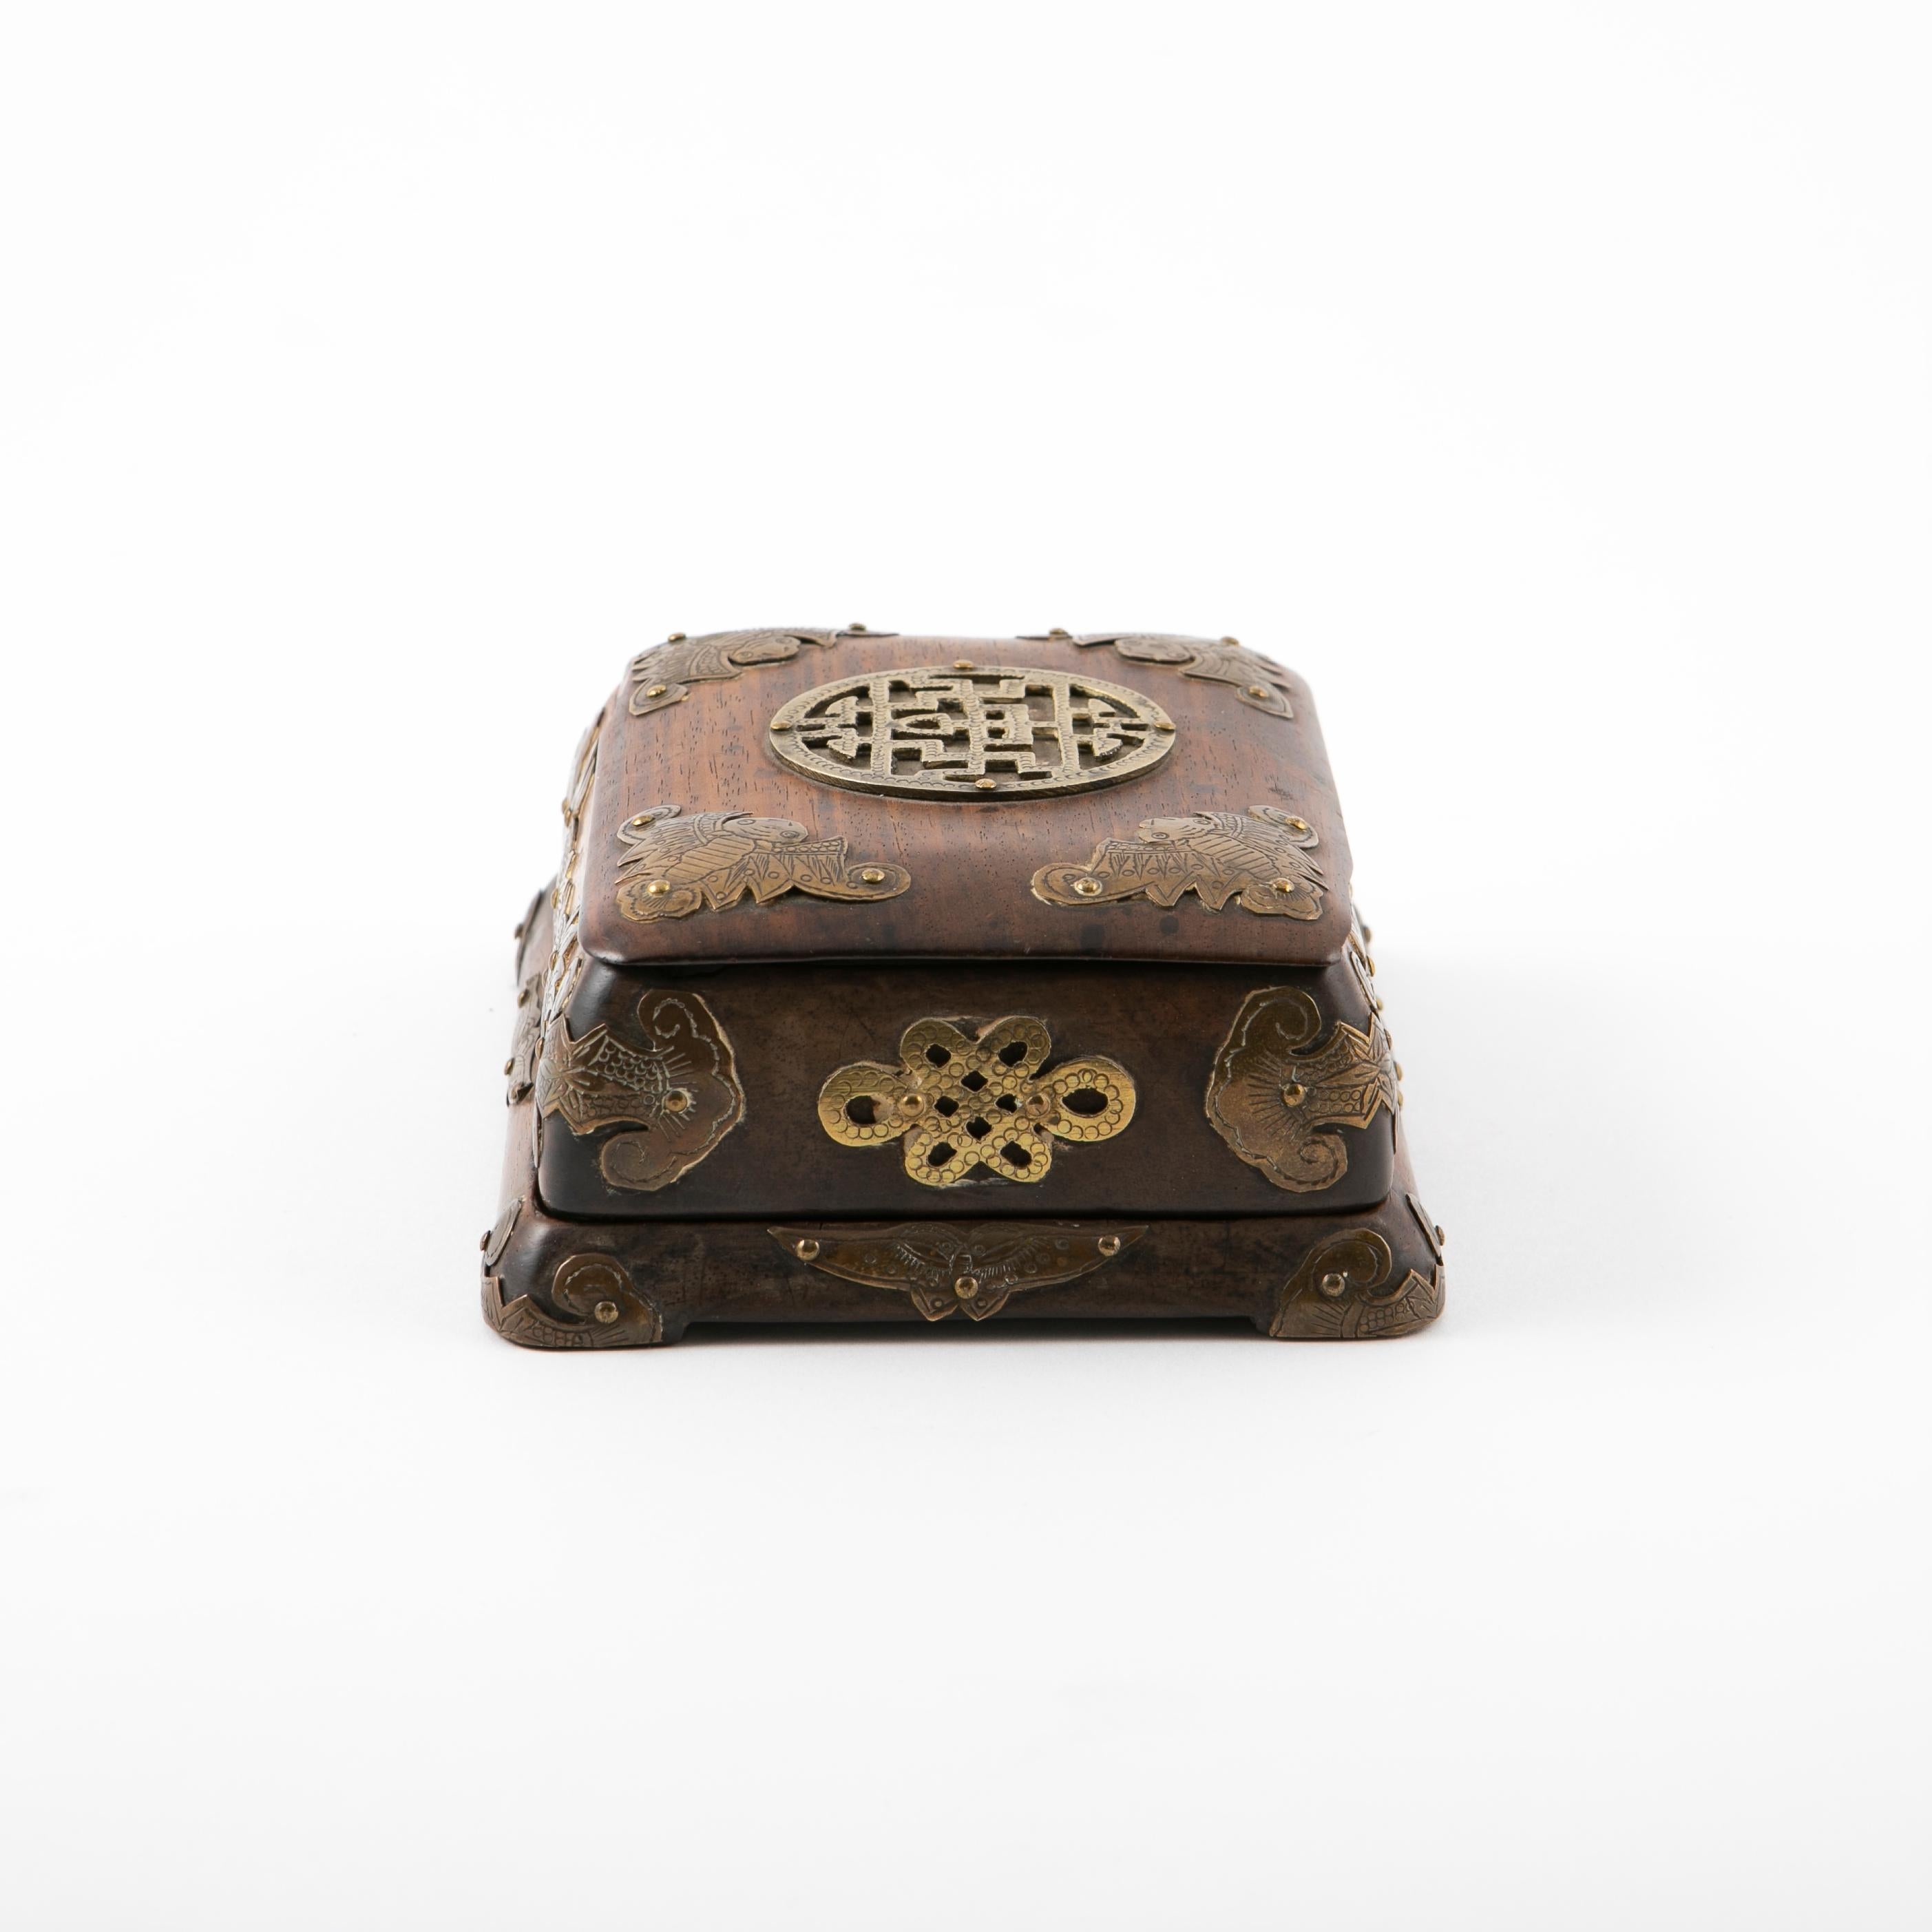 Chinese Qing Period Huanghuali Wood and Bronze Box In Good Condition For Sale In Kastrup, DK